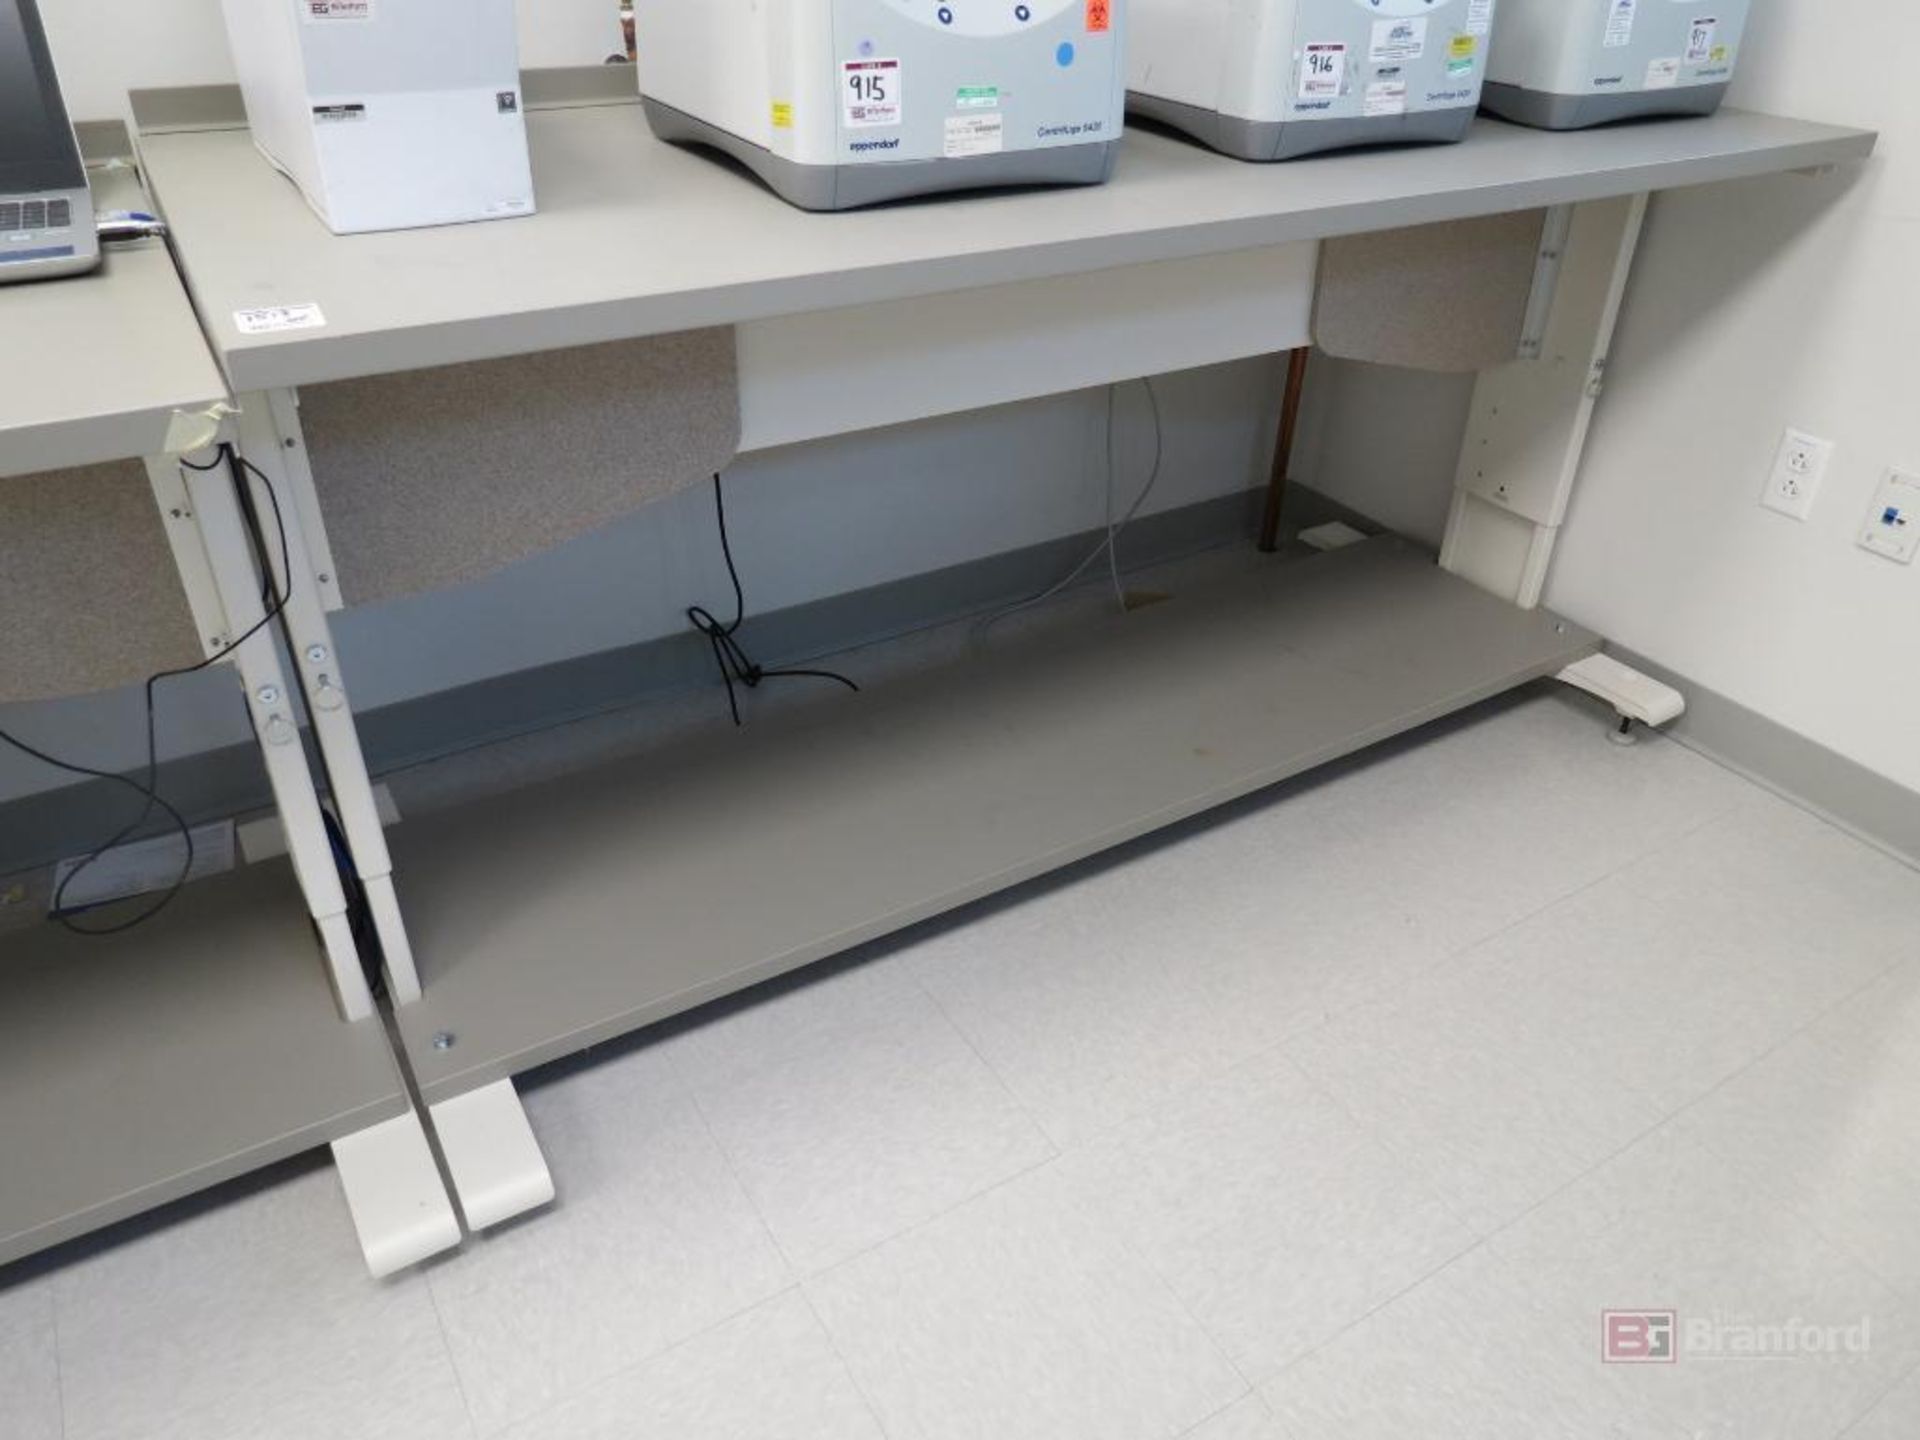 (2) Herman Miller for Healthcare Lab/Medical 6' Wide Benches - Image 3 of 3